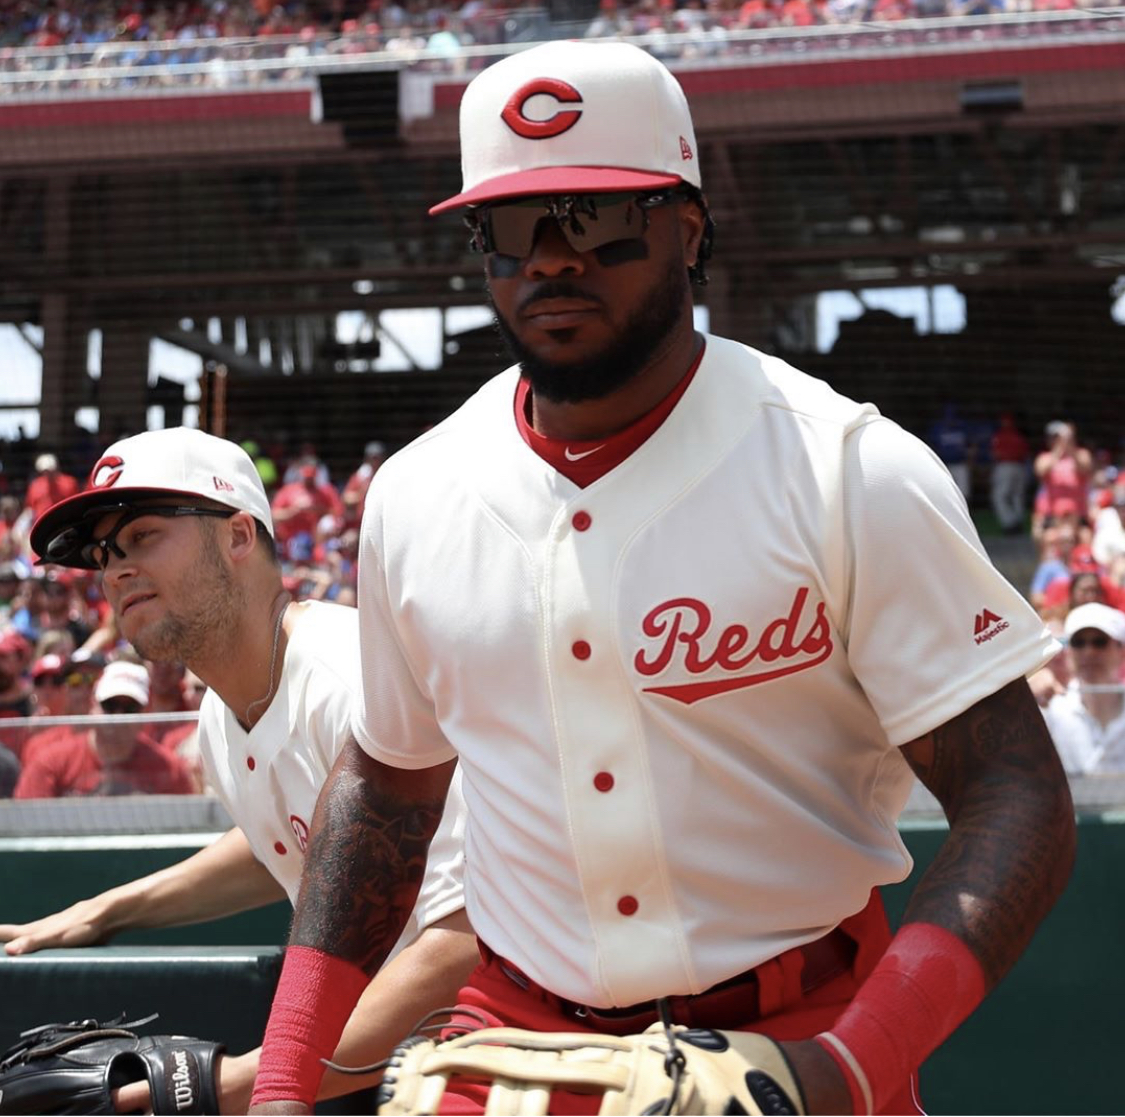 reds throwback jersey